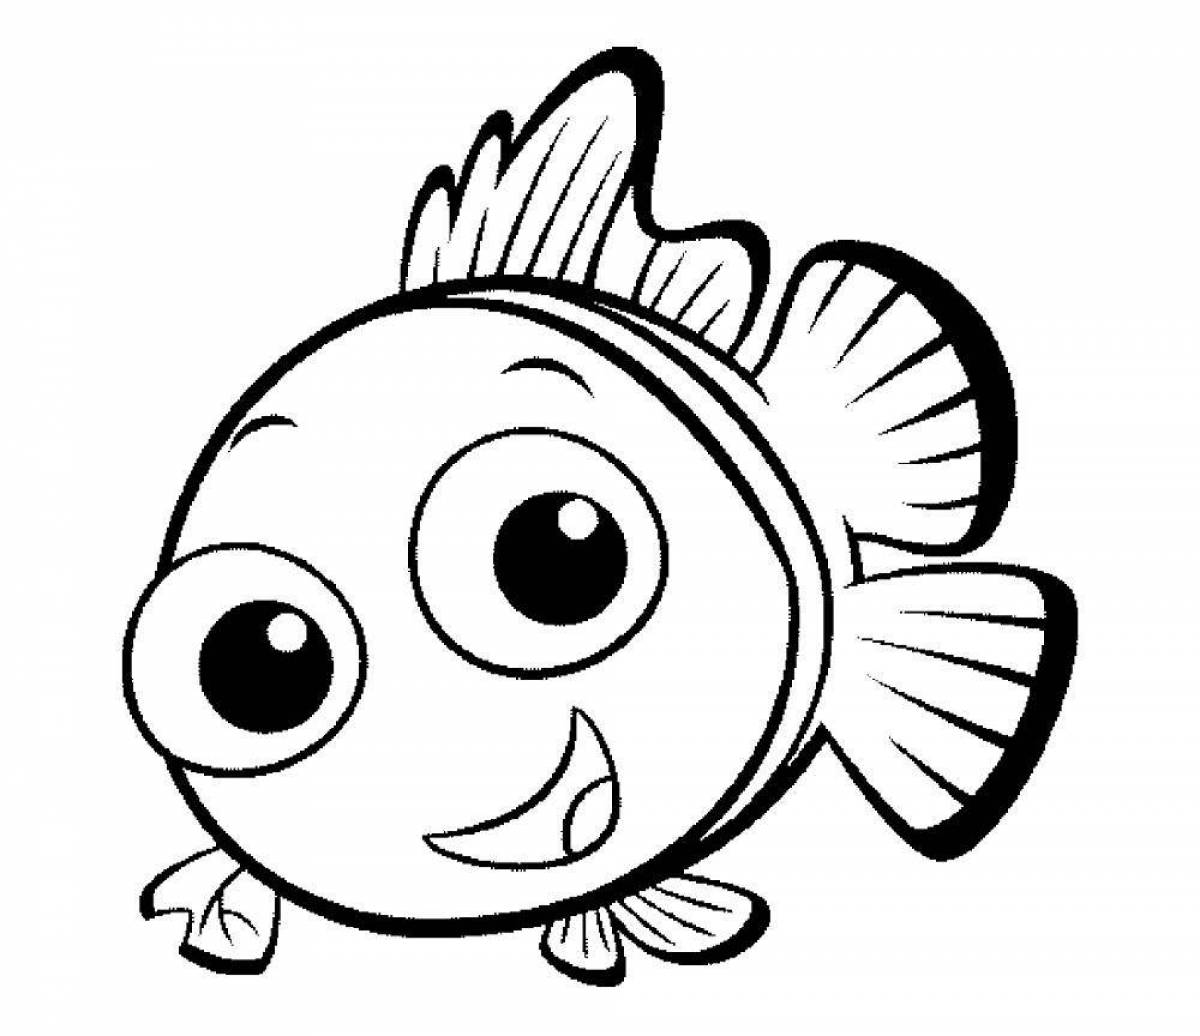 Funny clown fish coloring pages for kids